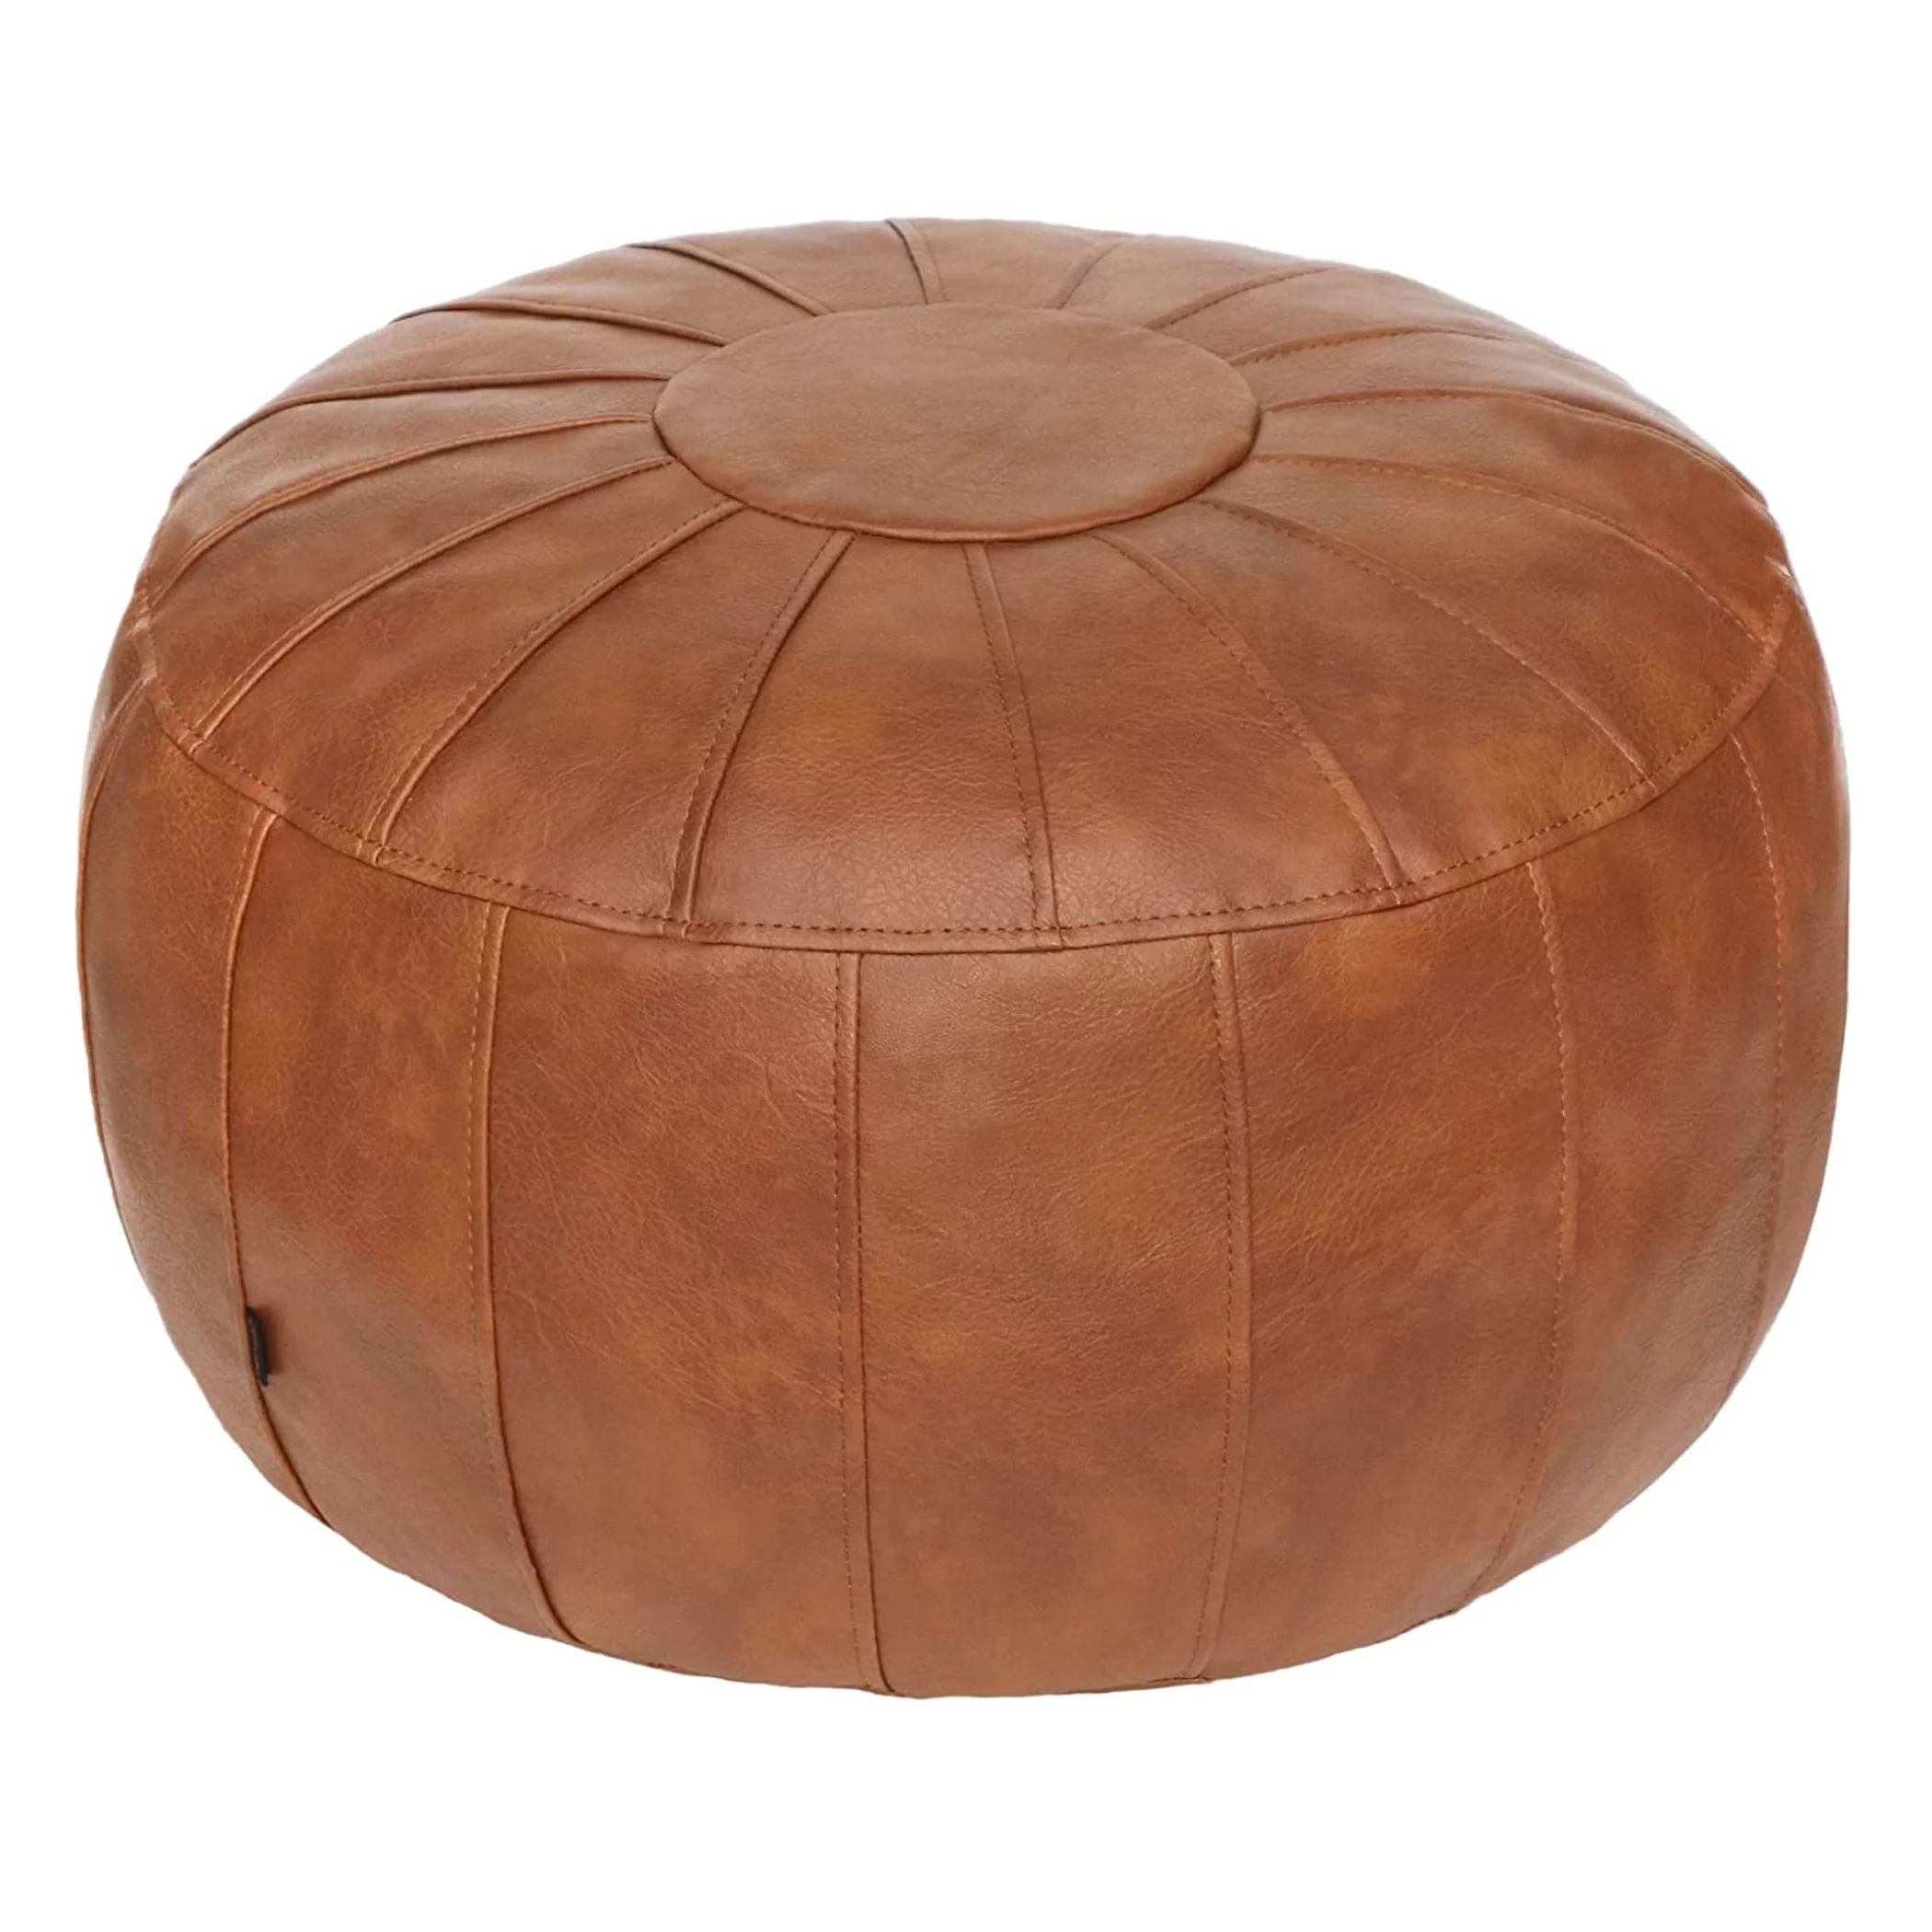 Thgonwid 21.7*13.7 inch Indoor Vegan Leather Pouf, Light Brown (Comes with No Filler) | Walmart (US)